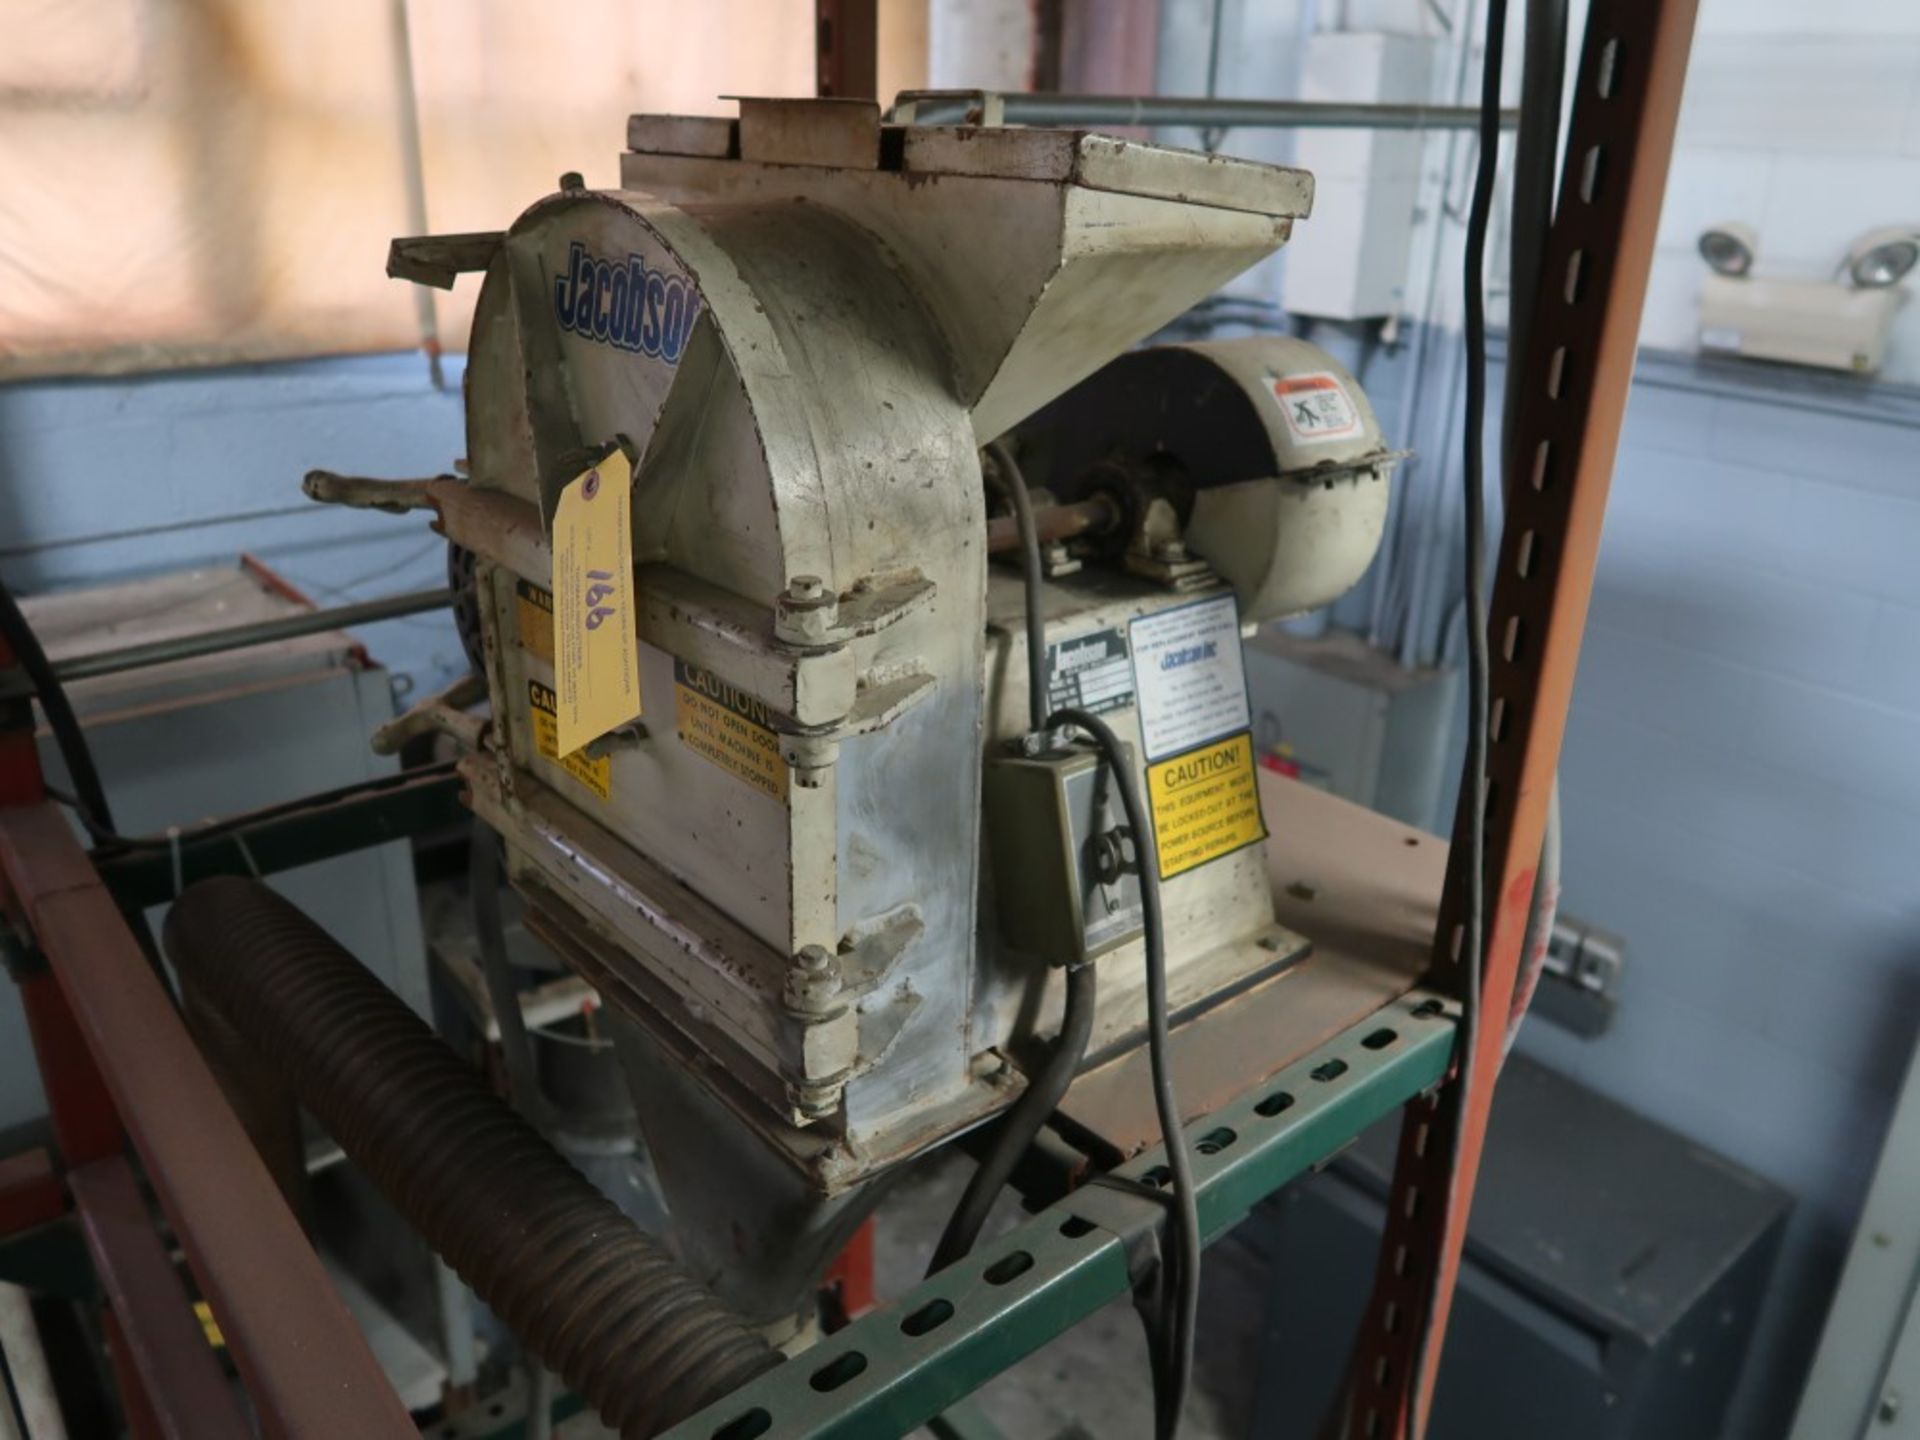 Jacobson Machinery Model 88B Vertical Mill S/N 37690 Max Speed 3600 (LOCATED ON MEZZANINE) - Image 2 of 4